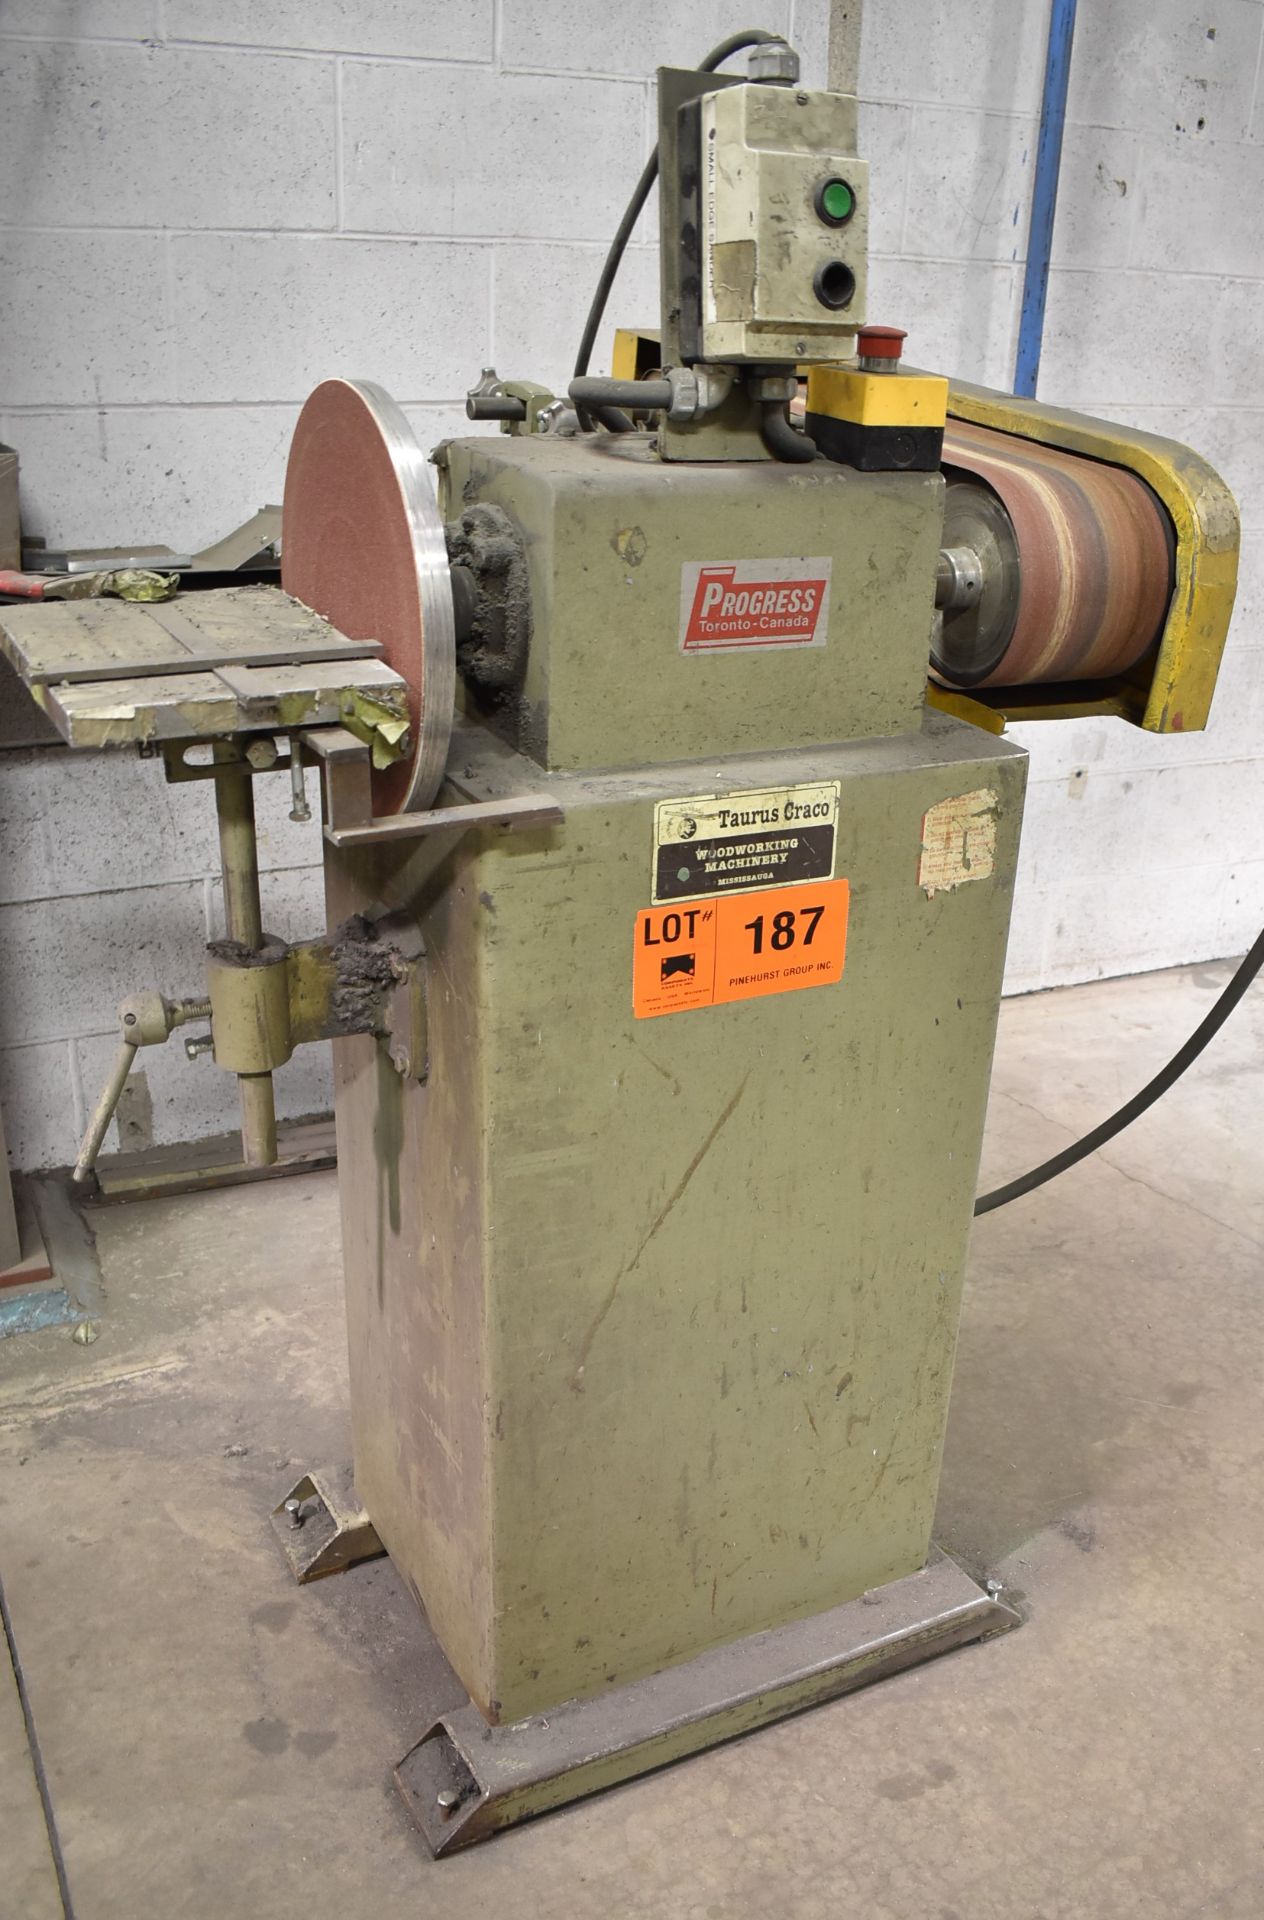 PROGRESS COMBINATION SANDER WITH 6" BELT, 12" DISC, S/N: N/A [RIGGING FEES FOR LOT #187 - $25 USD